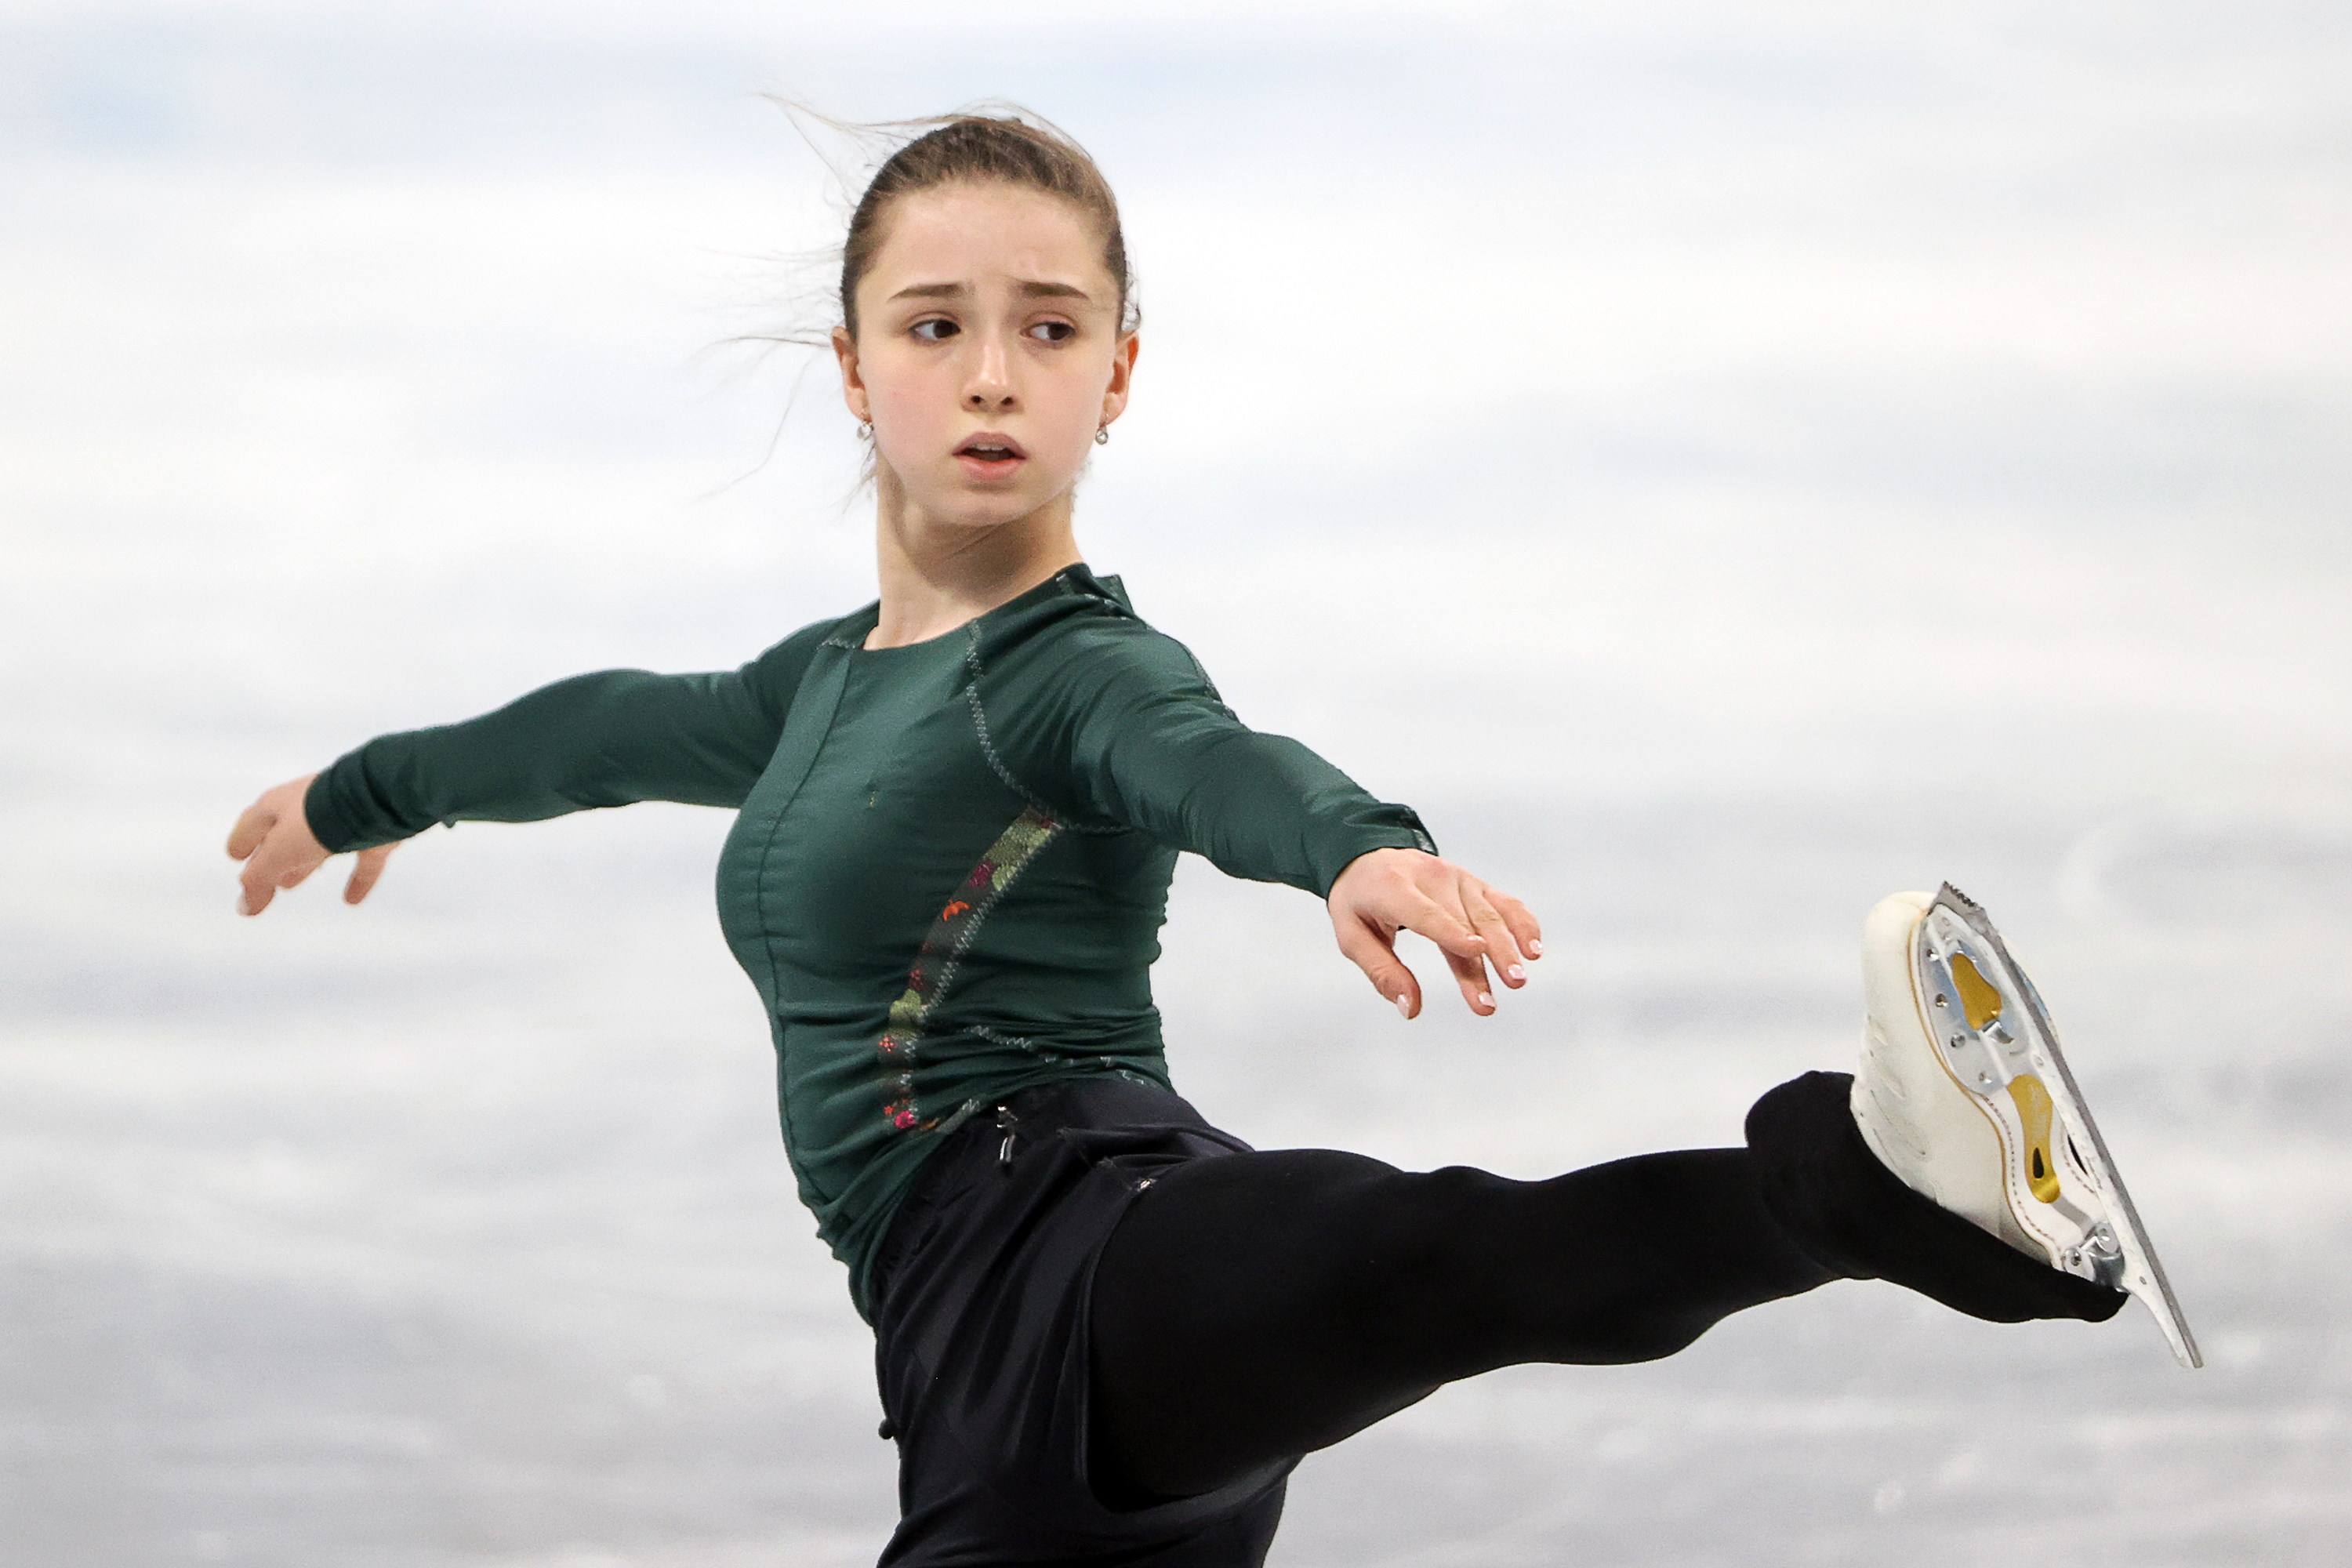 Team ROC figure skater Kamila Valieva is seen during a training session on Friday.